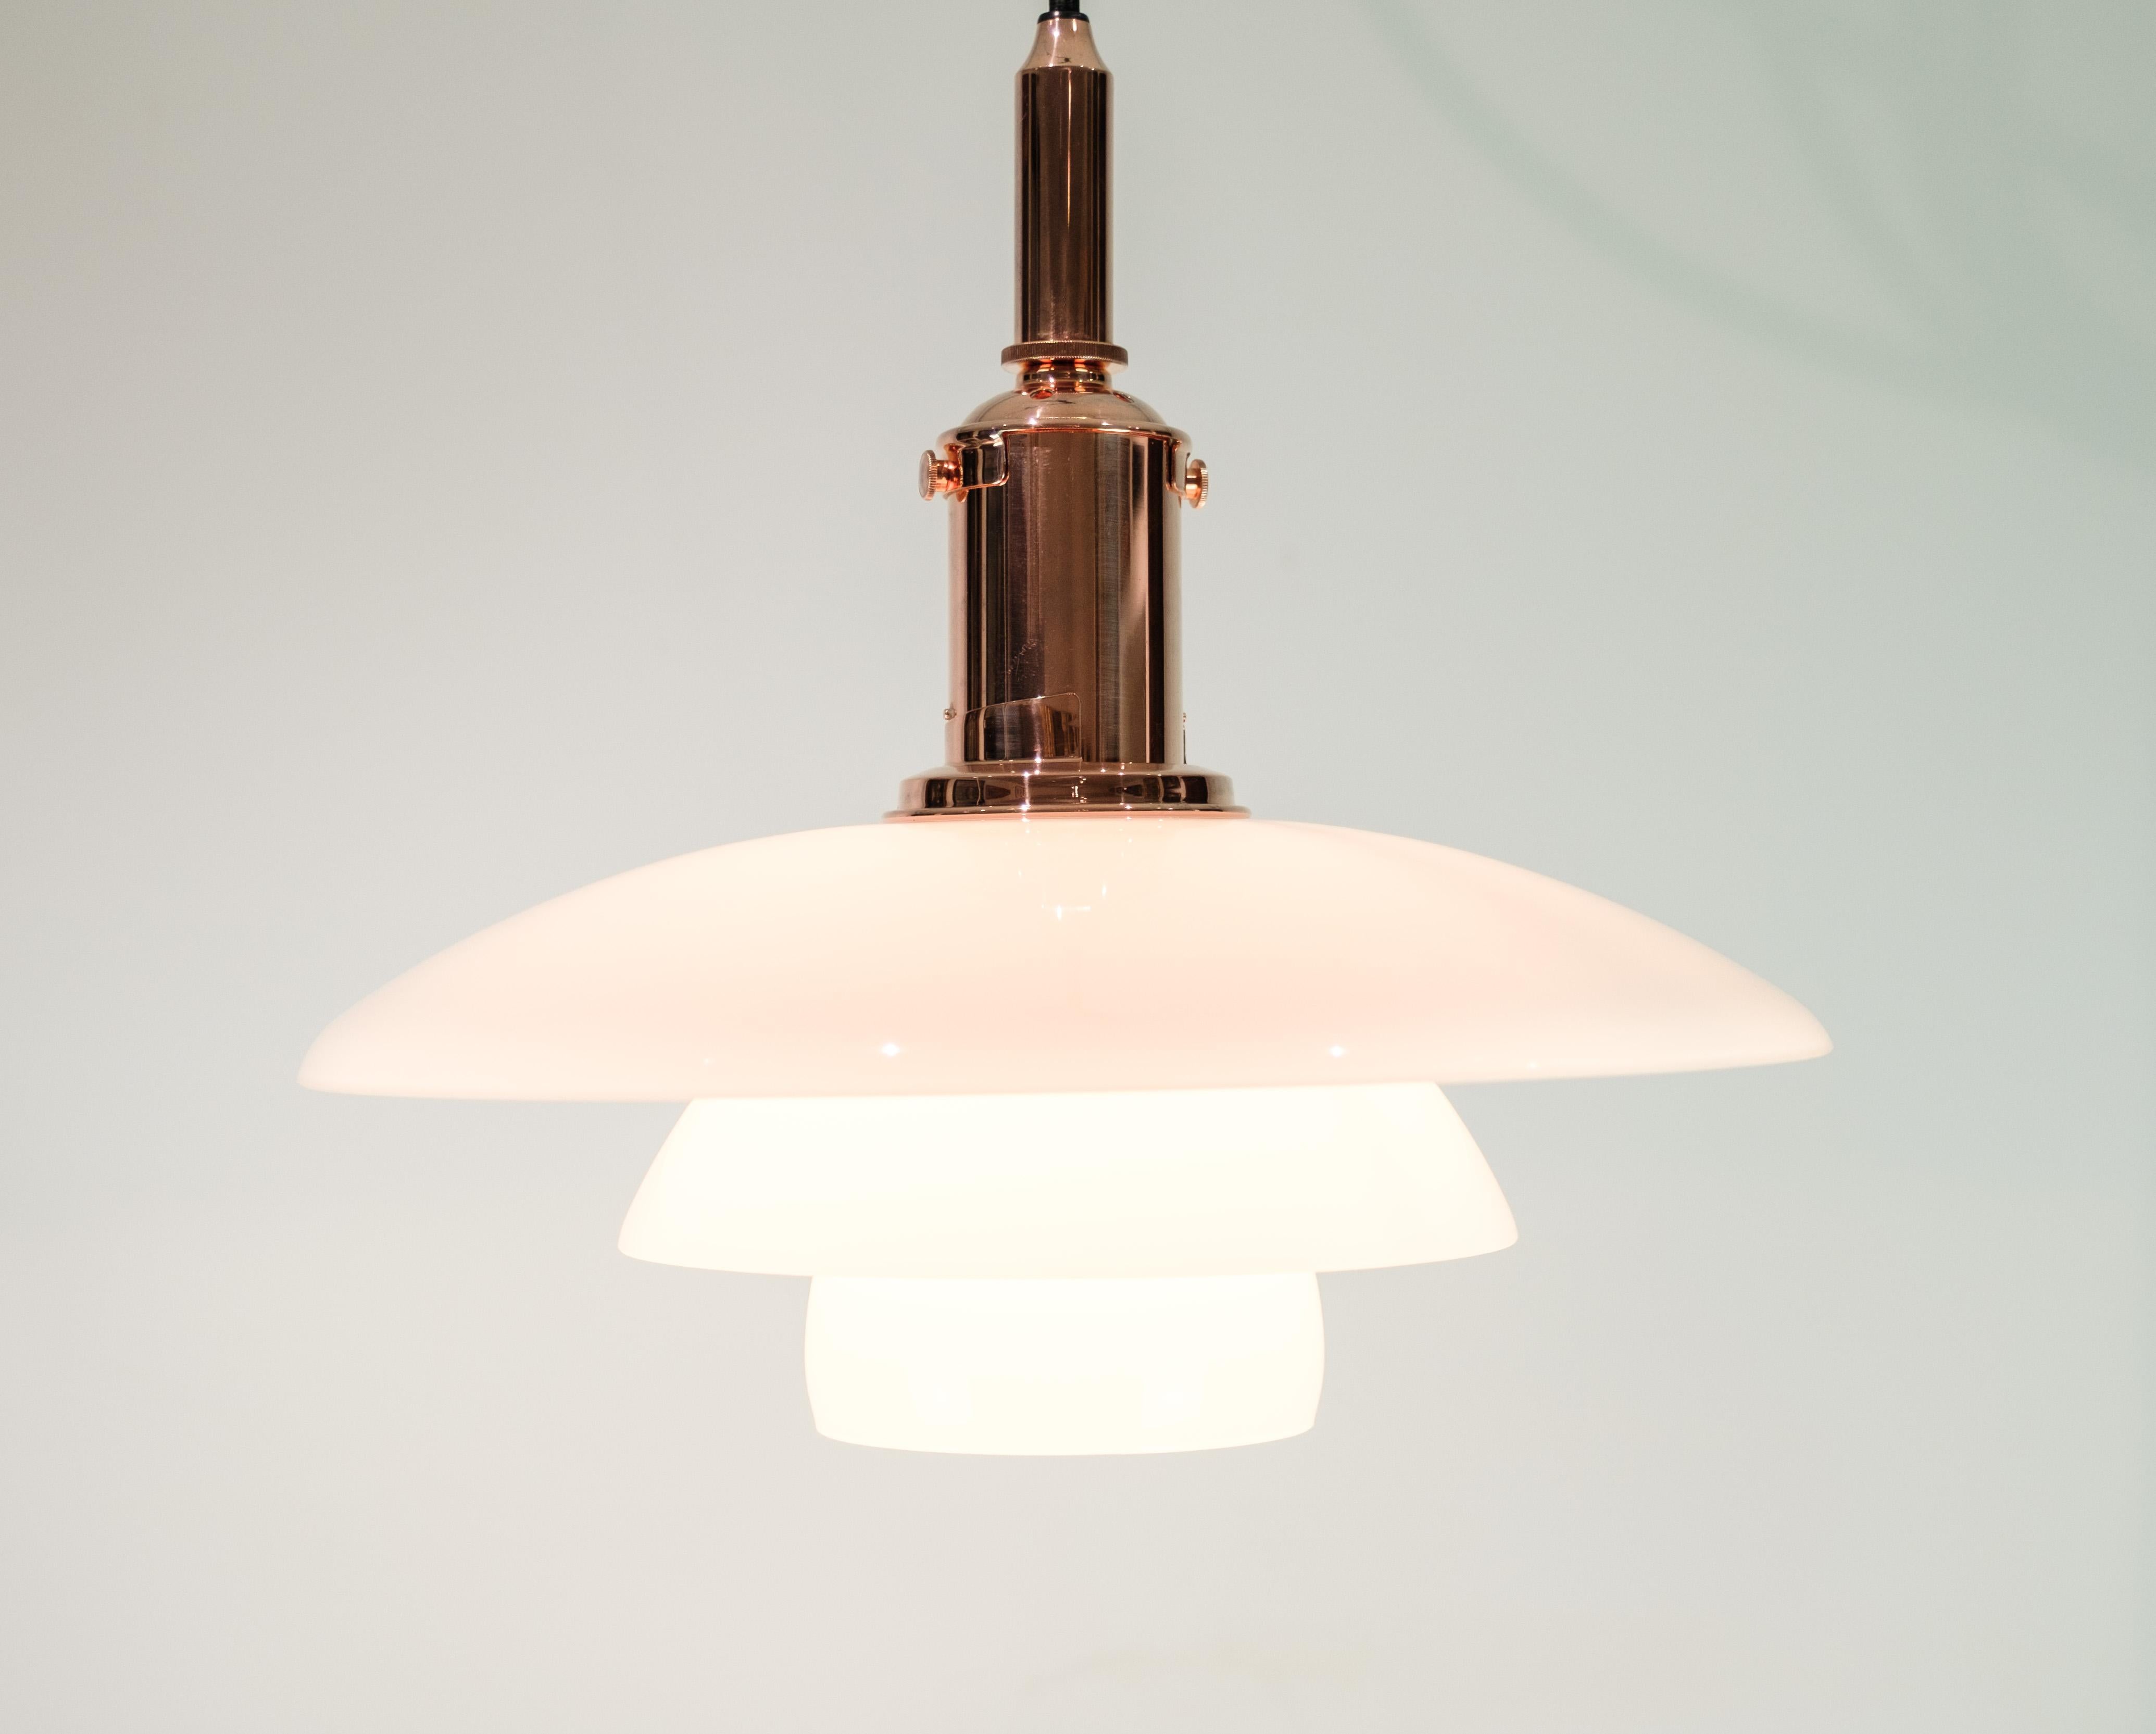 PH pendant, model 3½-3, limited edition in copper, designed by Poul Henningsen and produced by Louis Poulsen. On the occasion of Poul Henningsen's 120th birthday. Was only produced between 1 March 2014 to 30 May 2014. The lamp is made of copper with